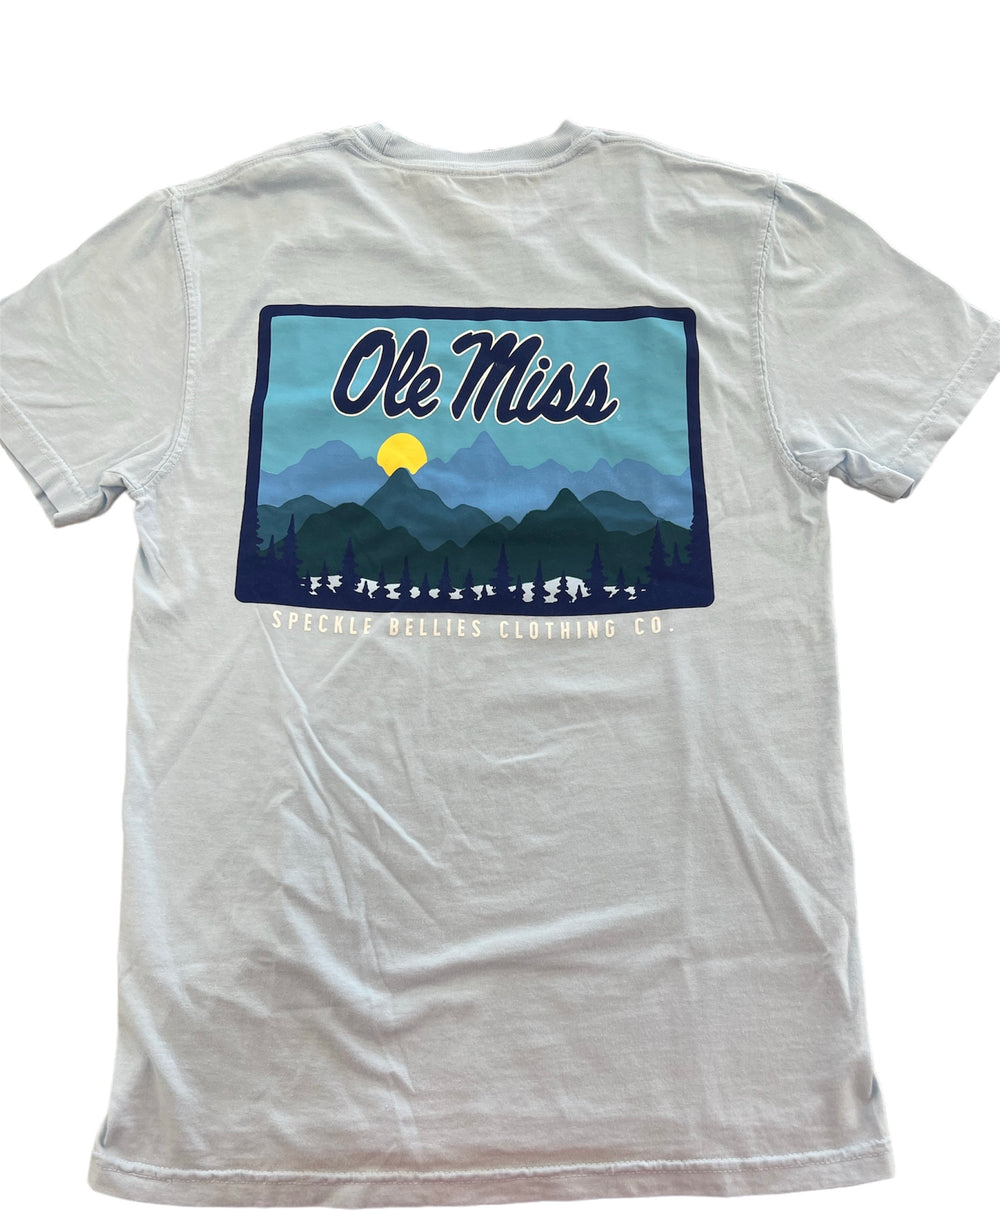 Speckle Bellies Ole Miss T-Shirt